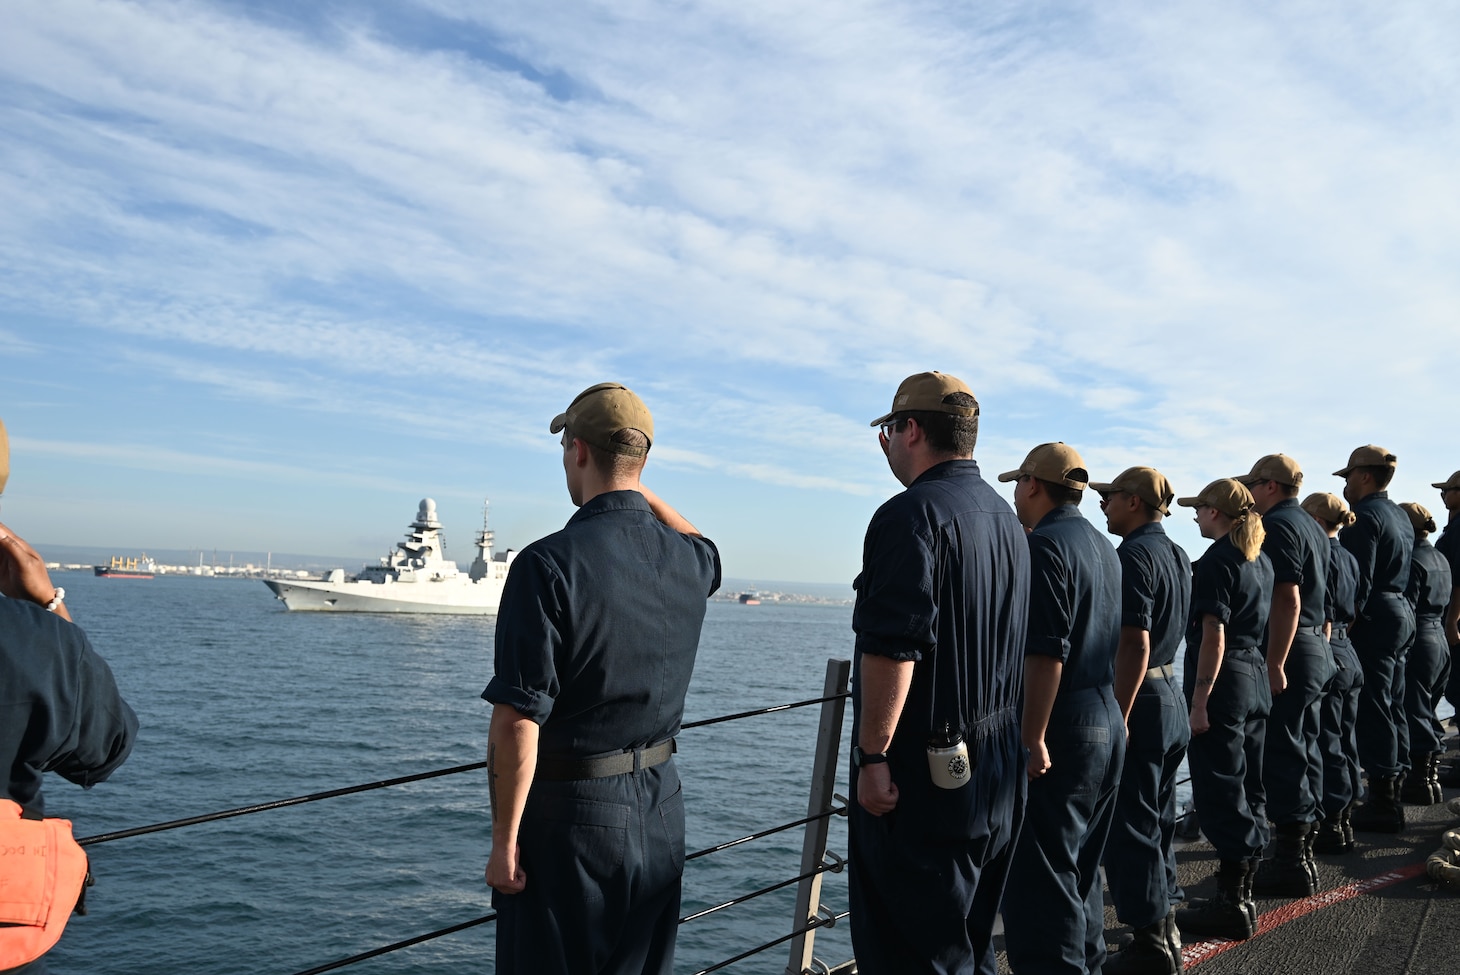 Sailors aboard Arleigh Burke-class guided missile destroyer USS Forrest Sherman (DDG 98) exchange honors with the Carlo Bergamini-class frigate ITS Carlo Bergamini (F 590) of the Italian Navy during a sea and anchor evolution into Taranto, Italy.